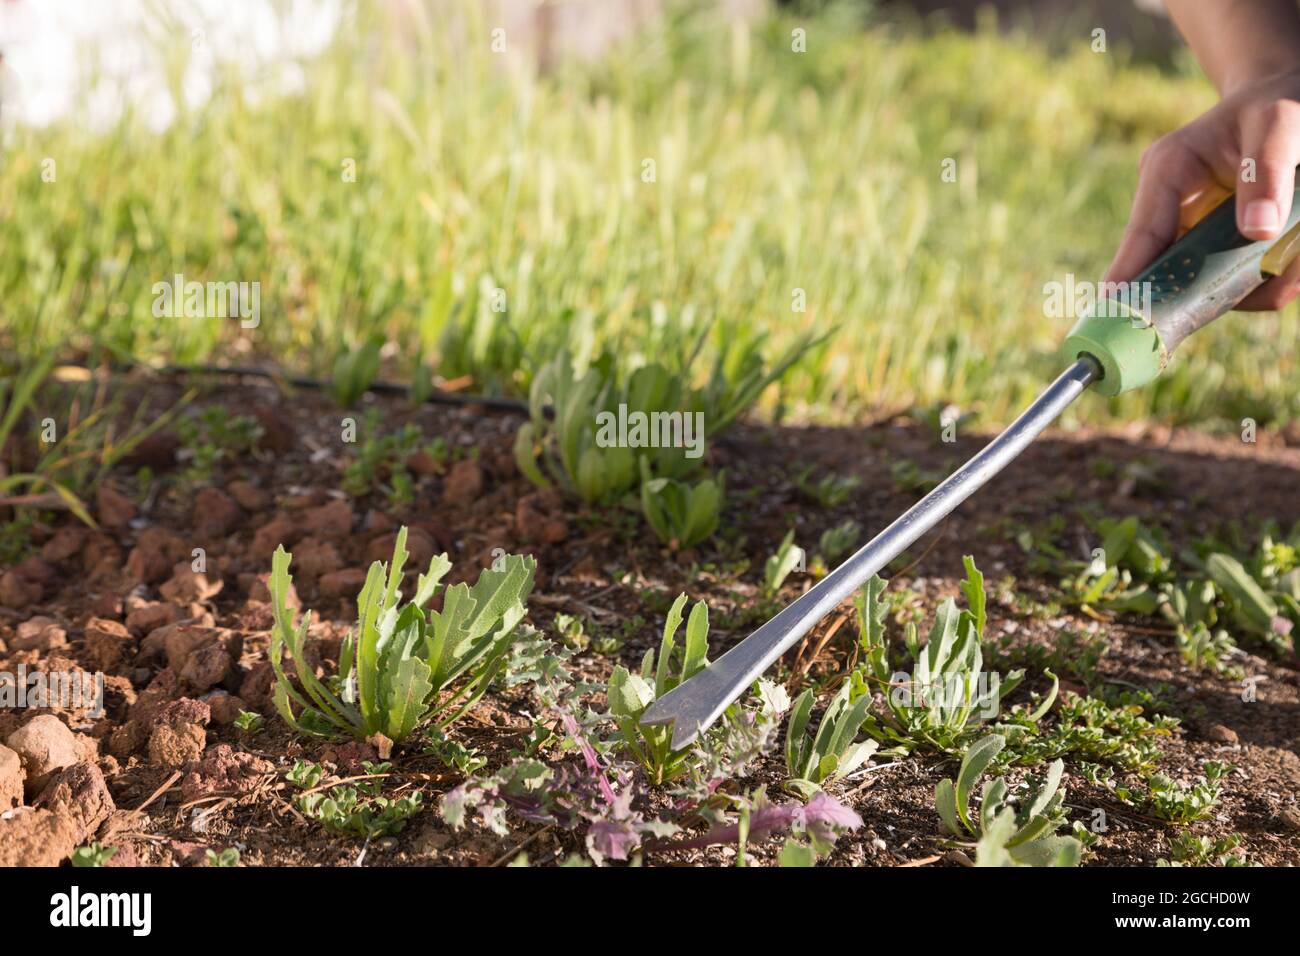 Hand holding Dandelion Weeder removing dandelions from ground Stock Photo